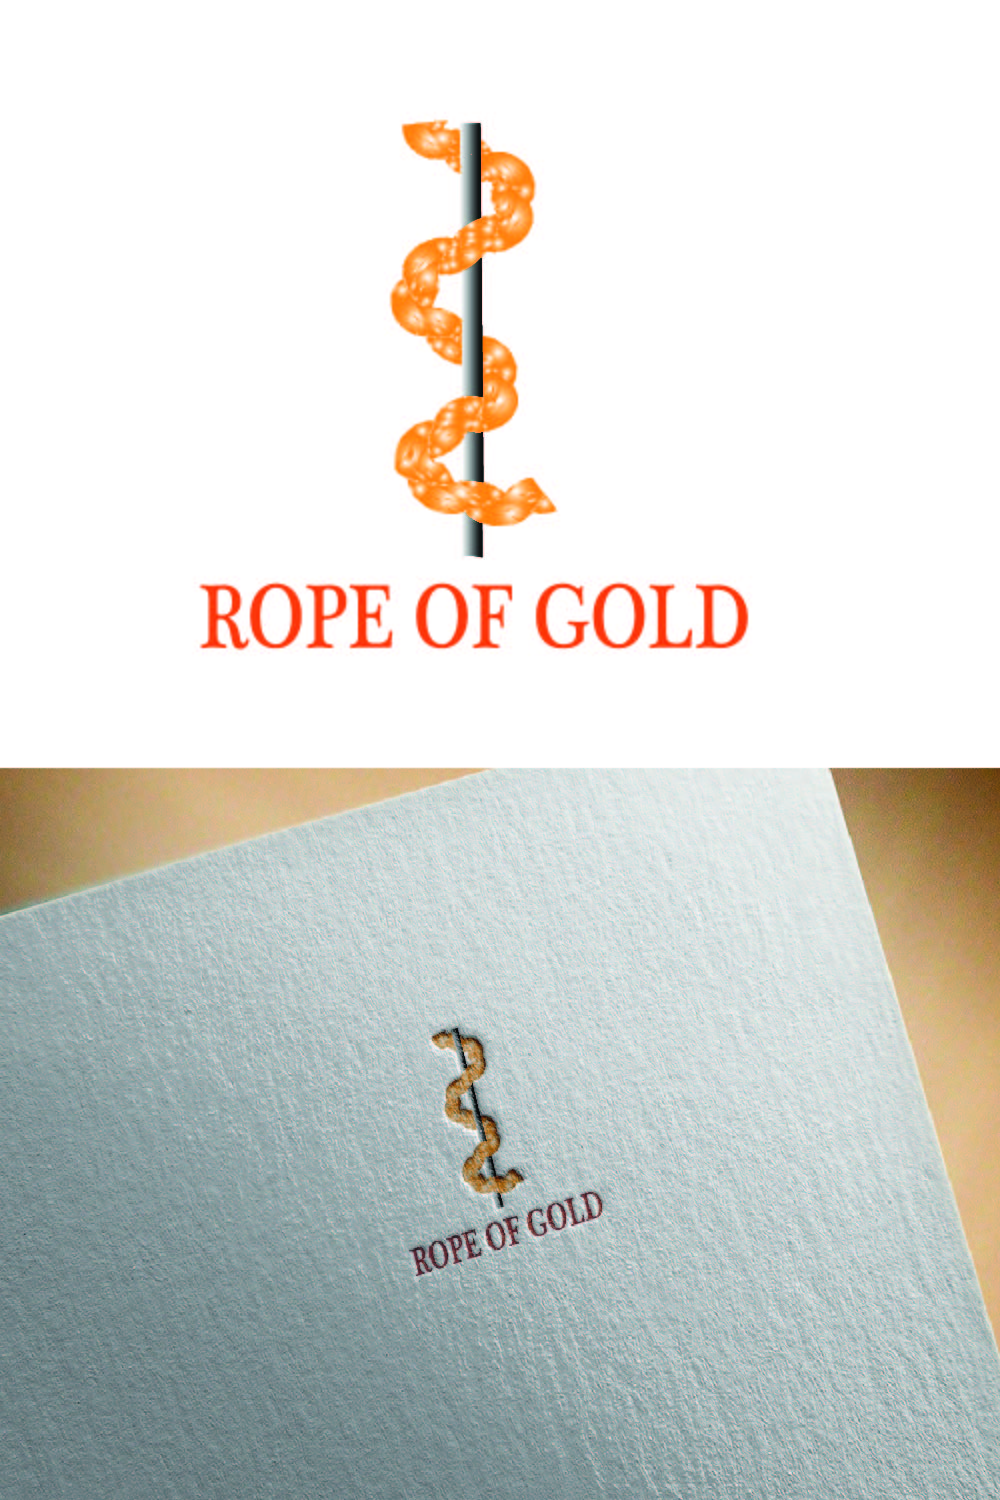 Rope Of The Gold pinterest image.